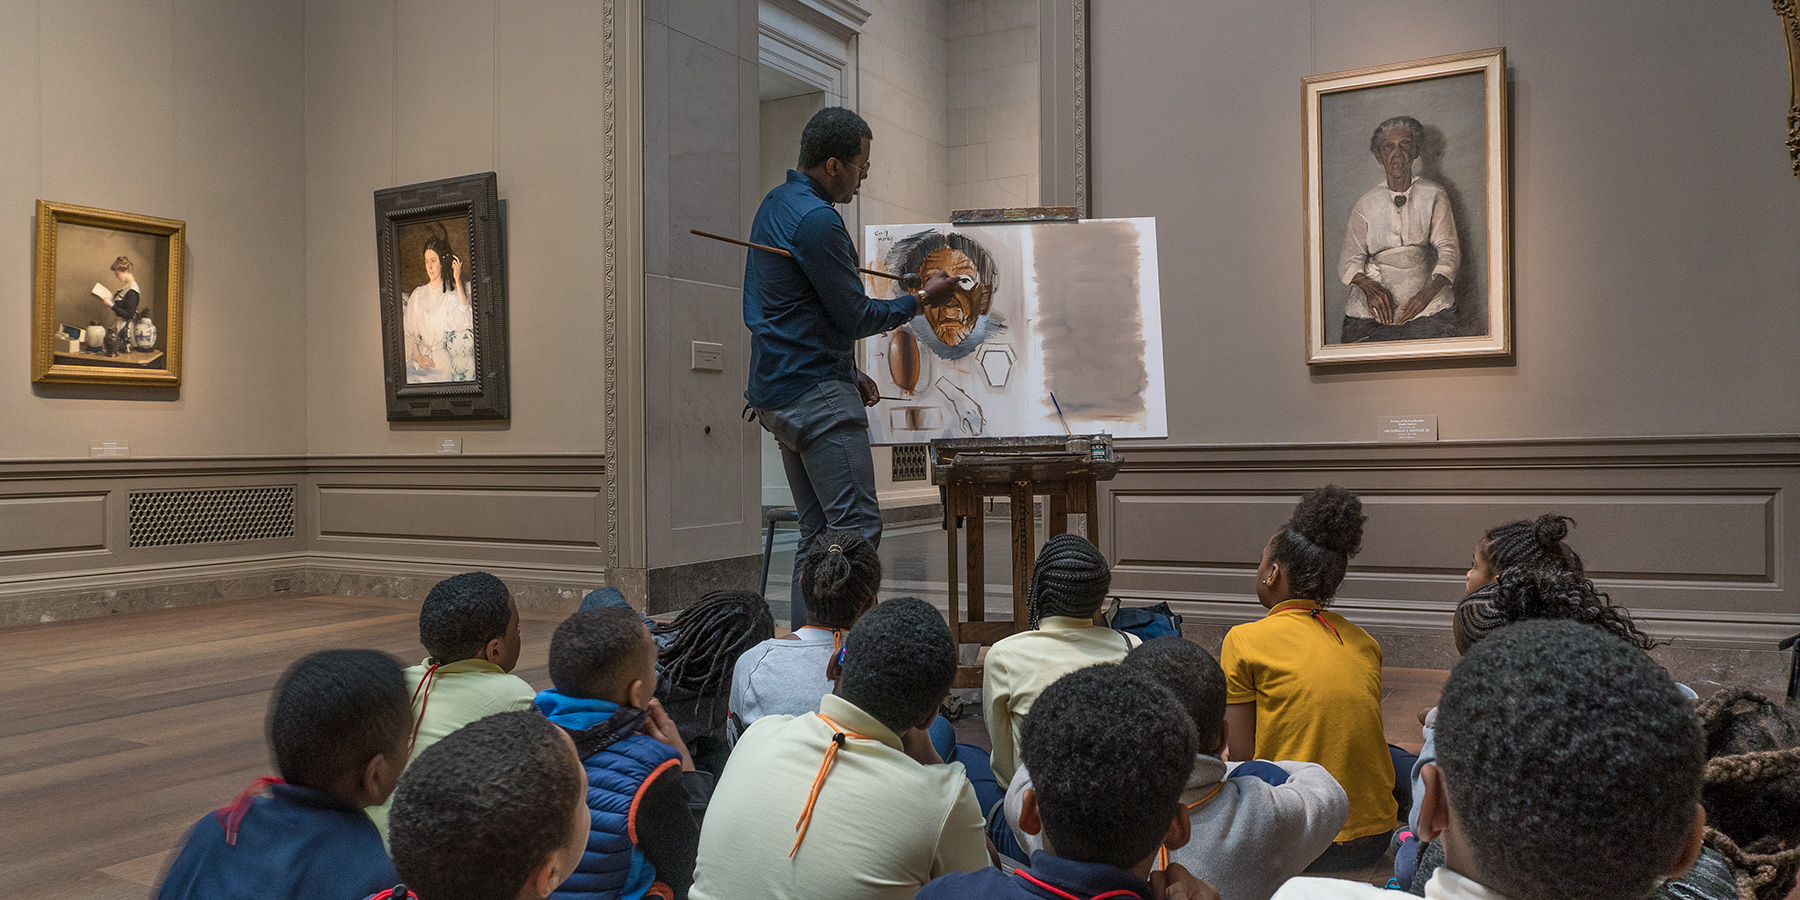 An art copyist is standing before a group of primary school aged children seated on the floor while he paints a copy of a portrait.